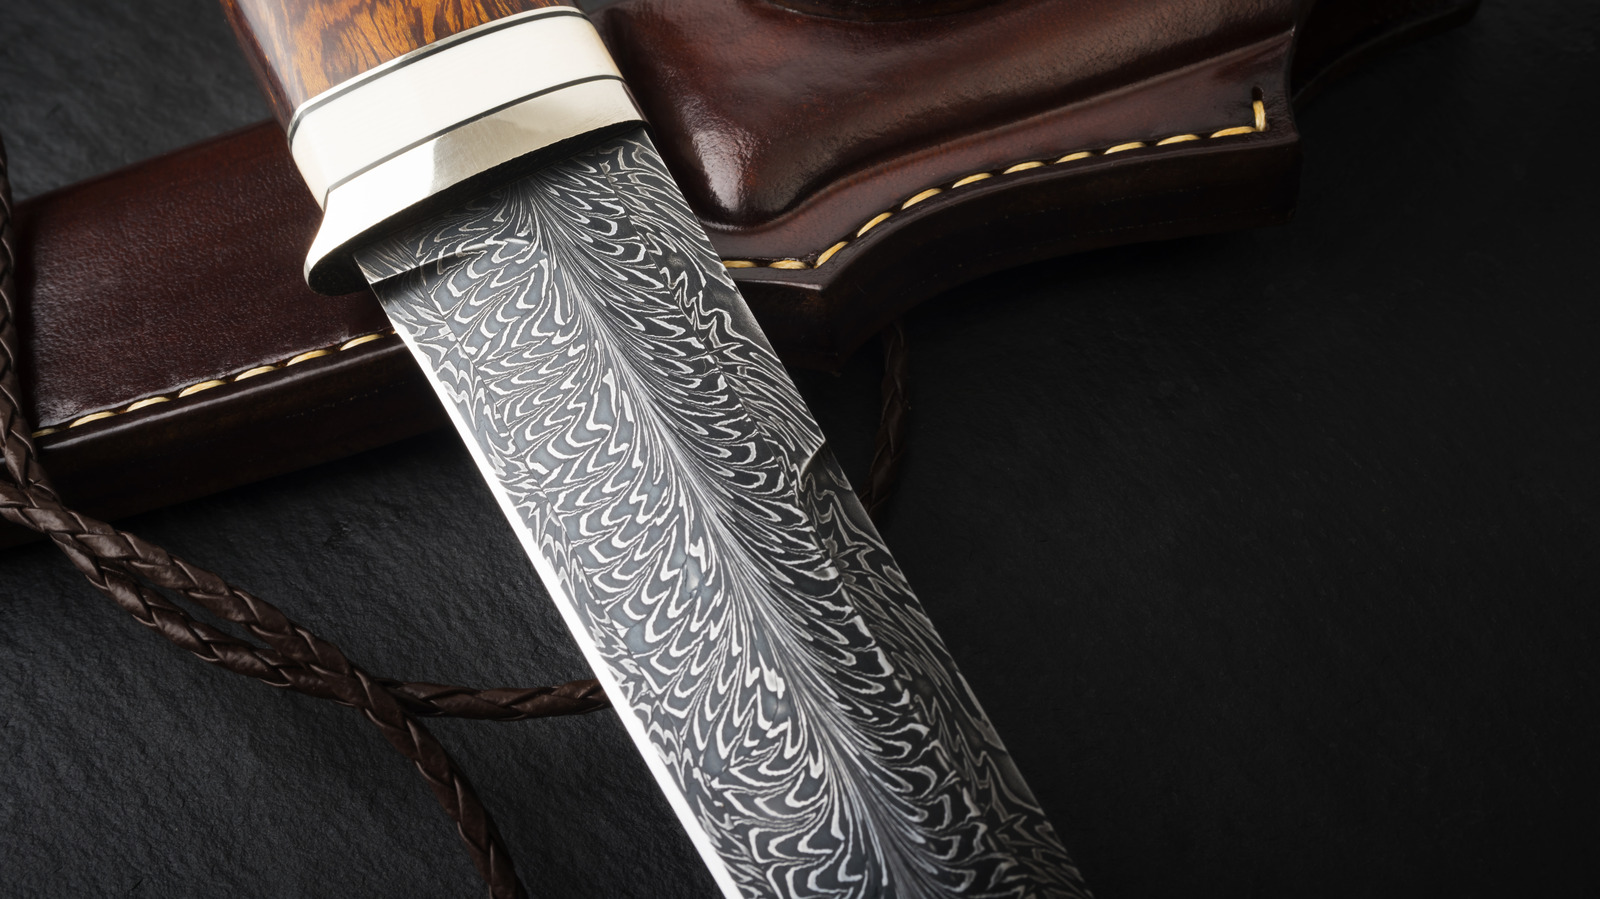 Damascus steel knife forged in fire 